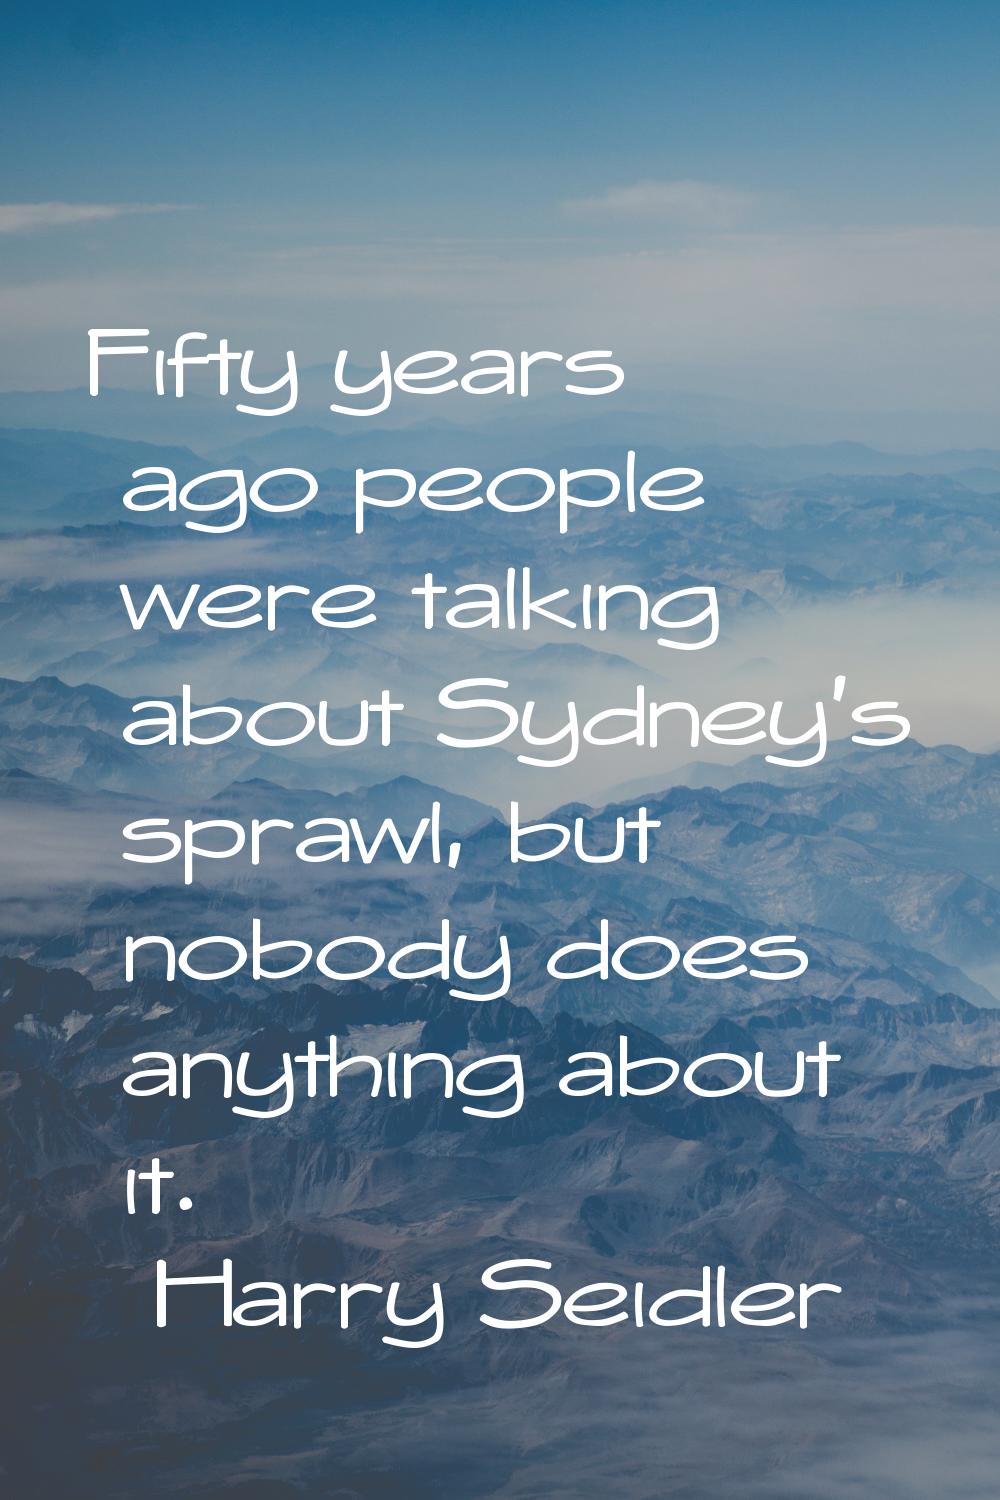 Fifty years ago people were talking about Sydney's sprawl, but nobody does anything about it.